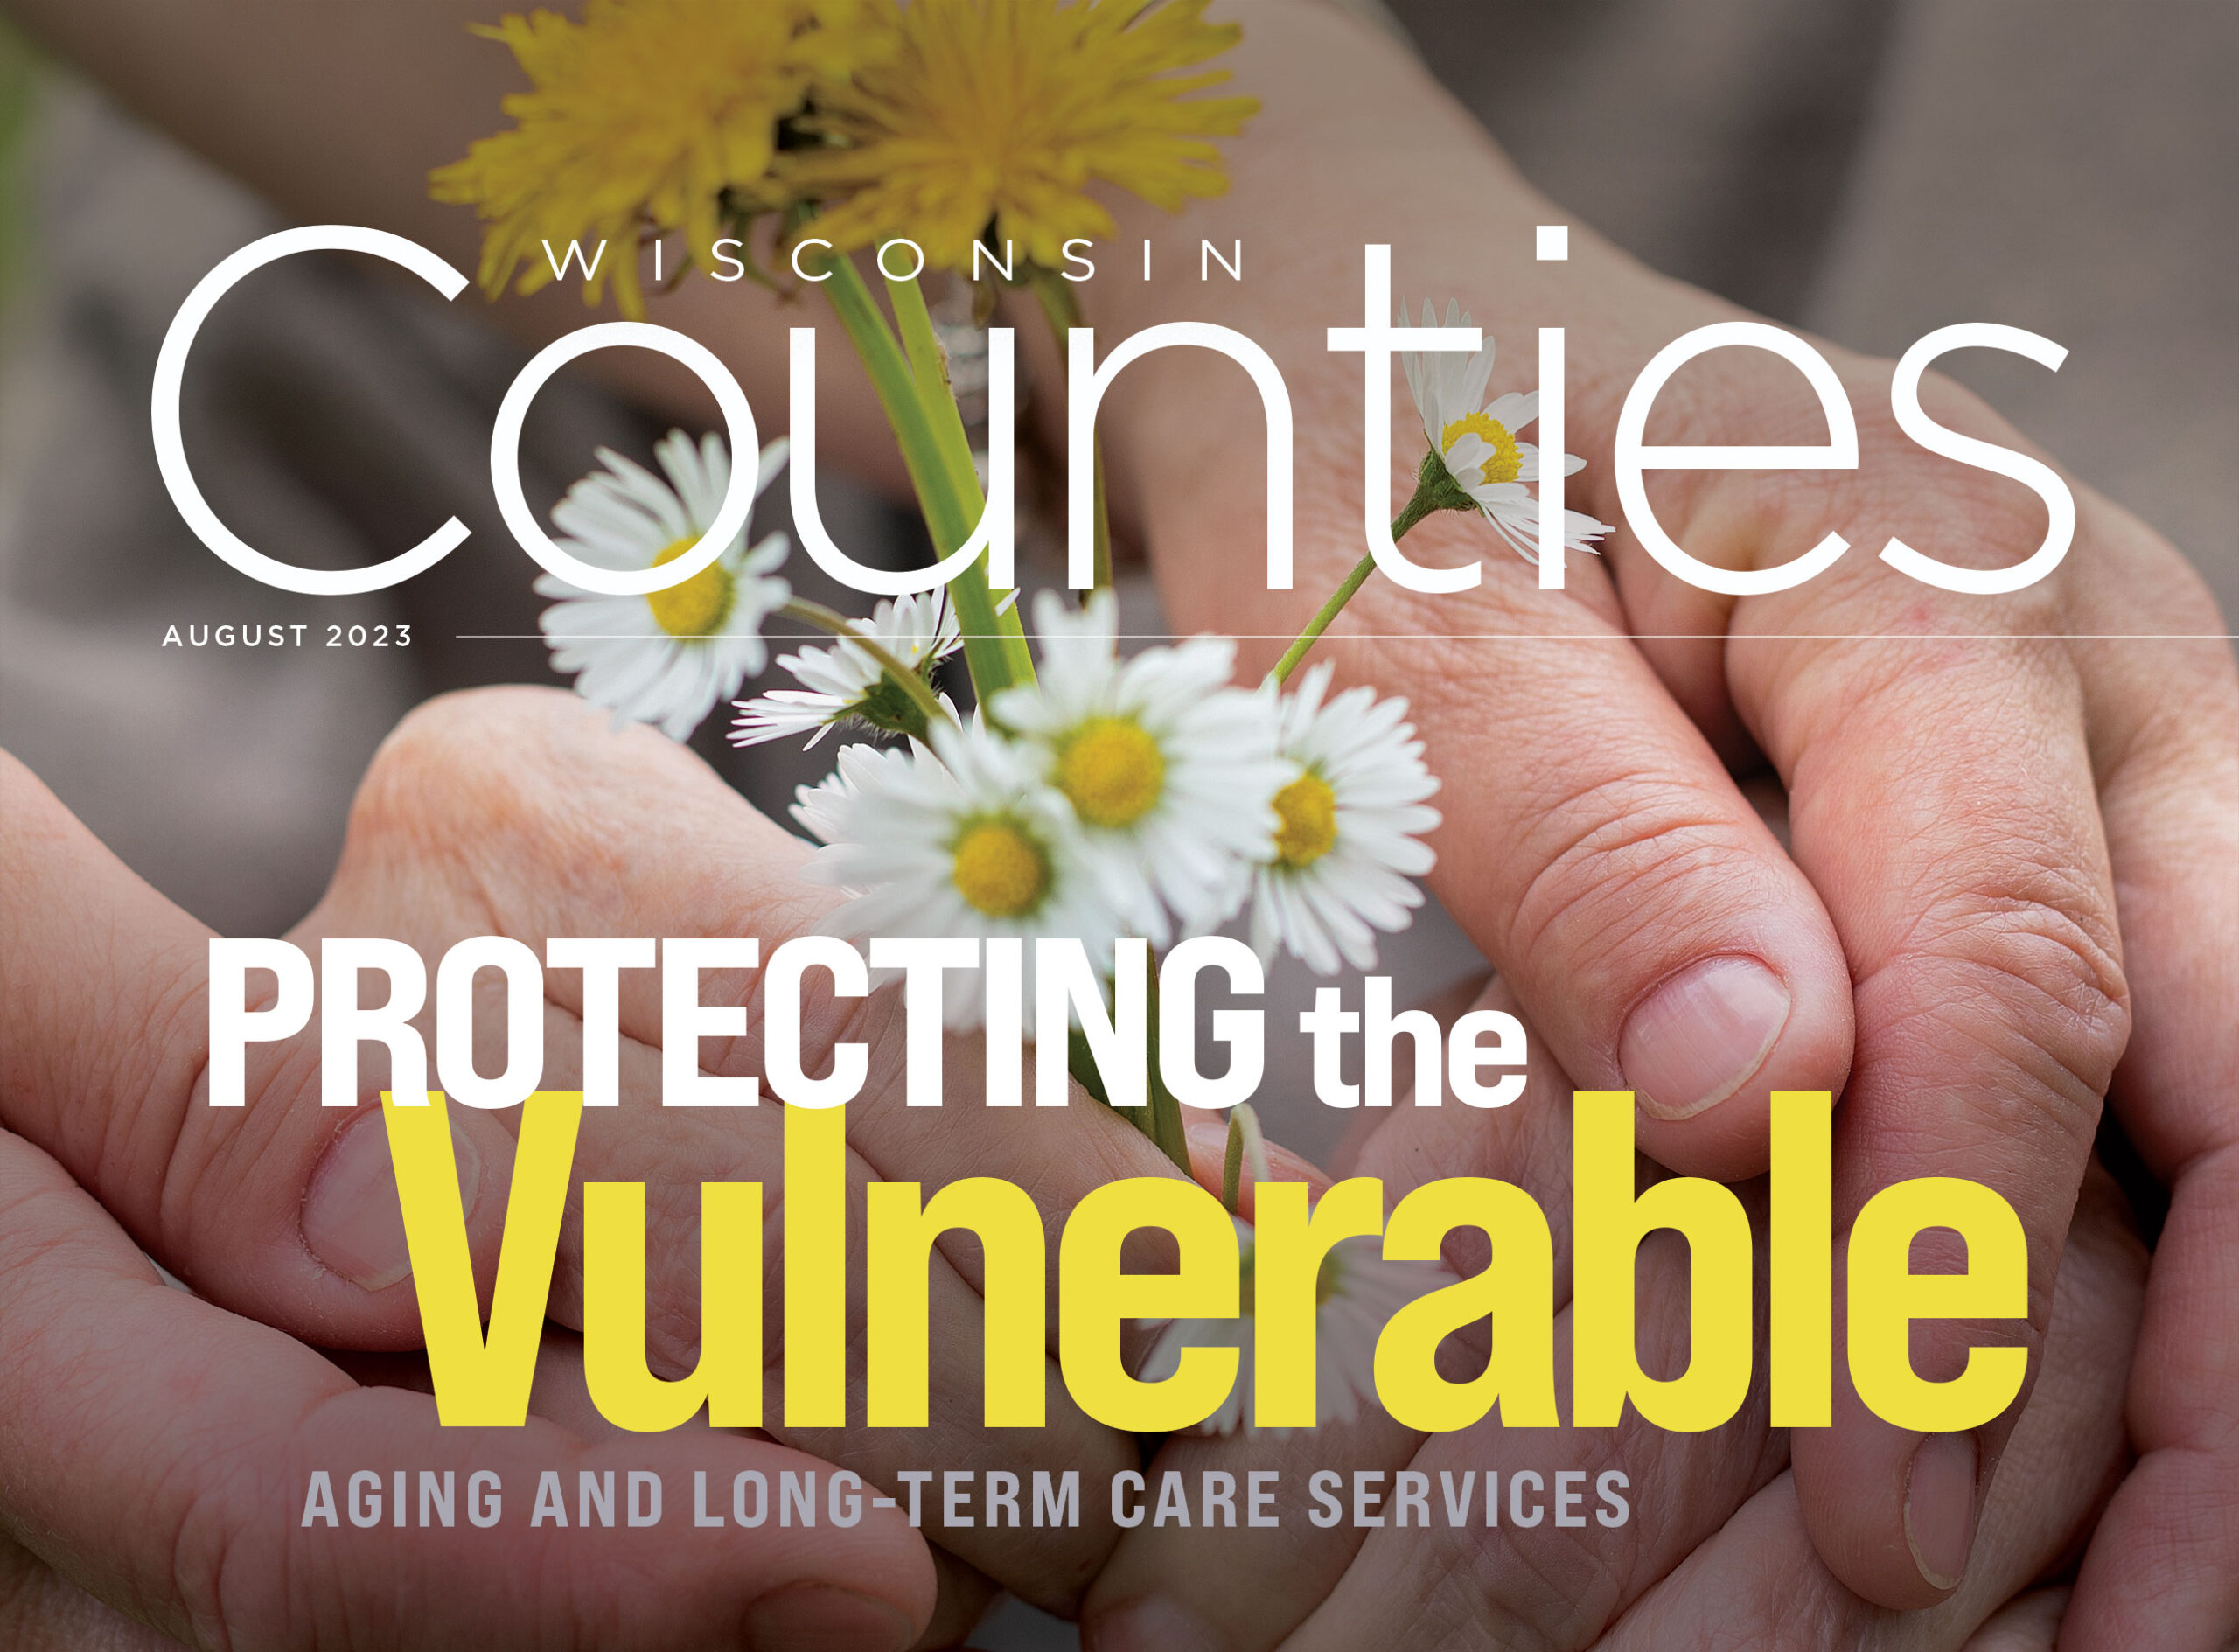 Protecting the Vulnerable: Aging and Long-Term Care Services